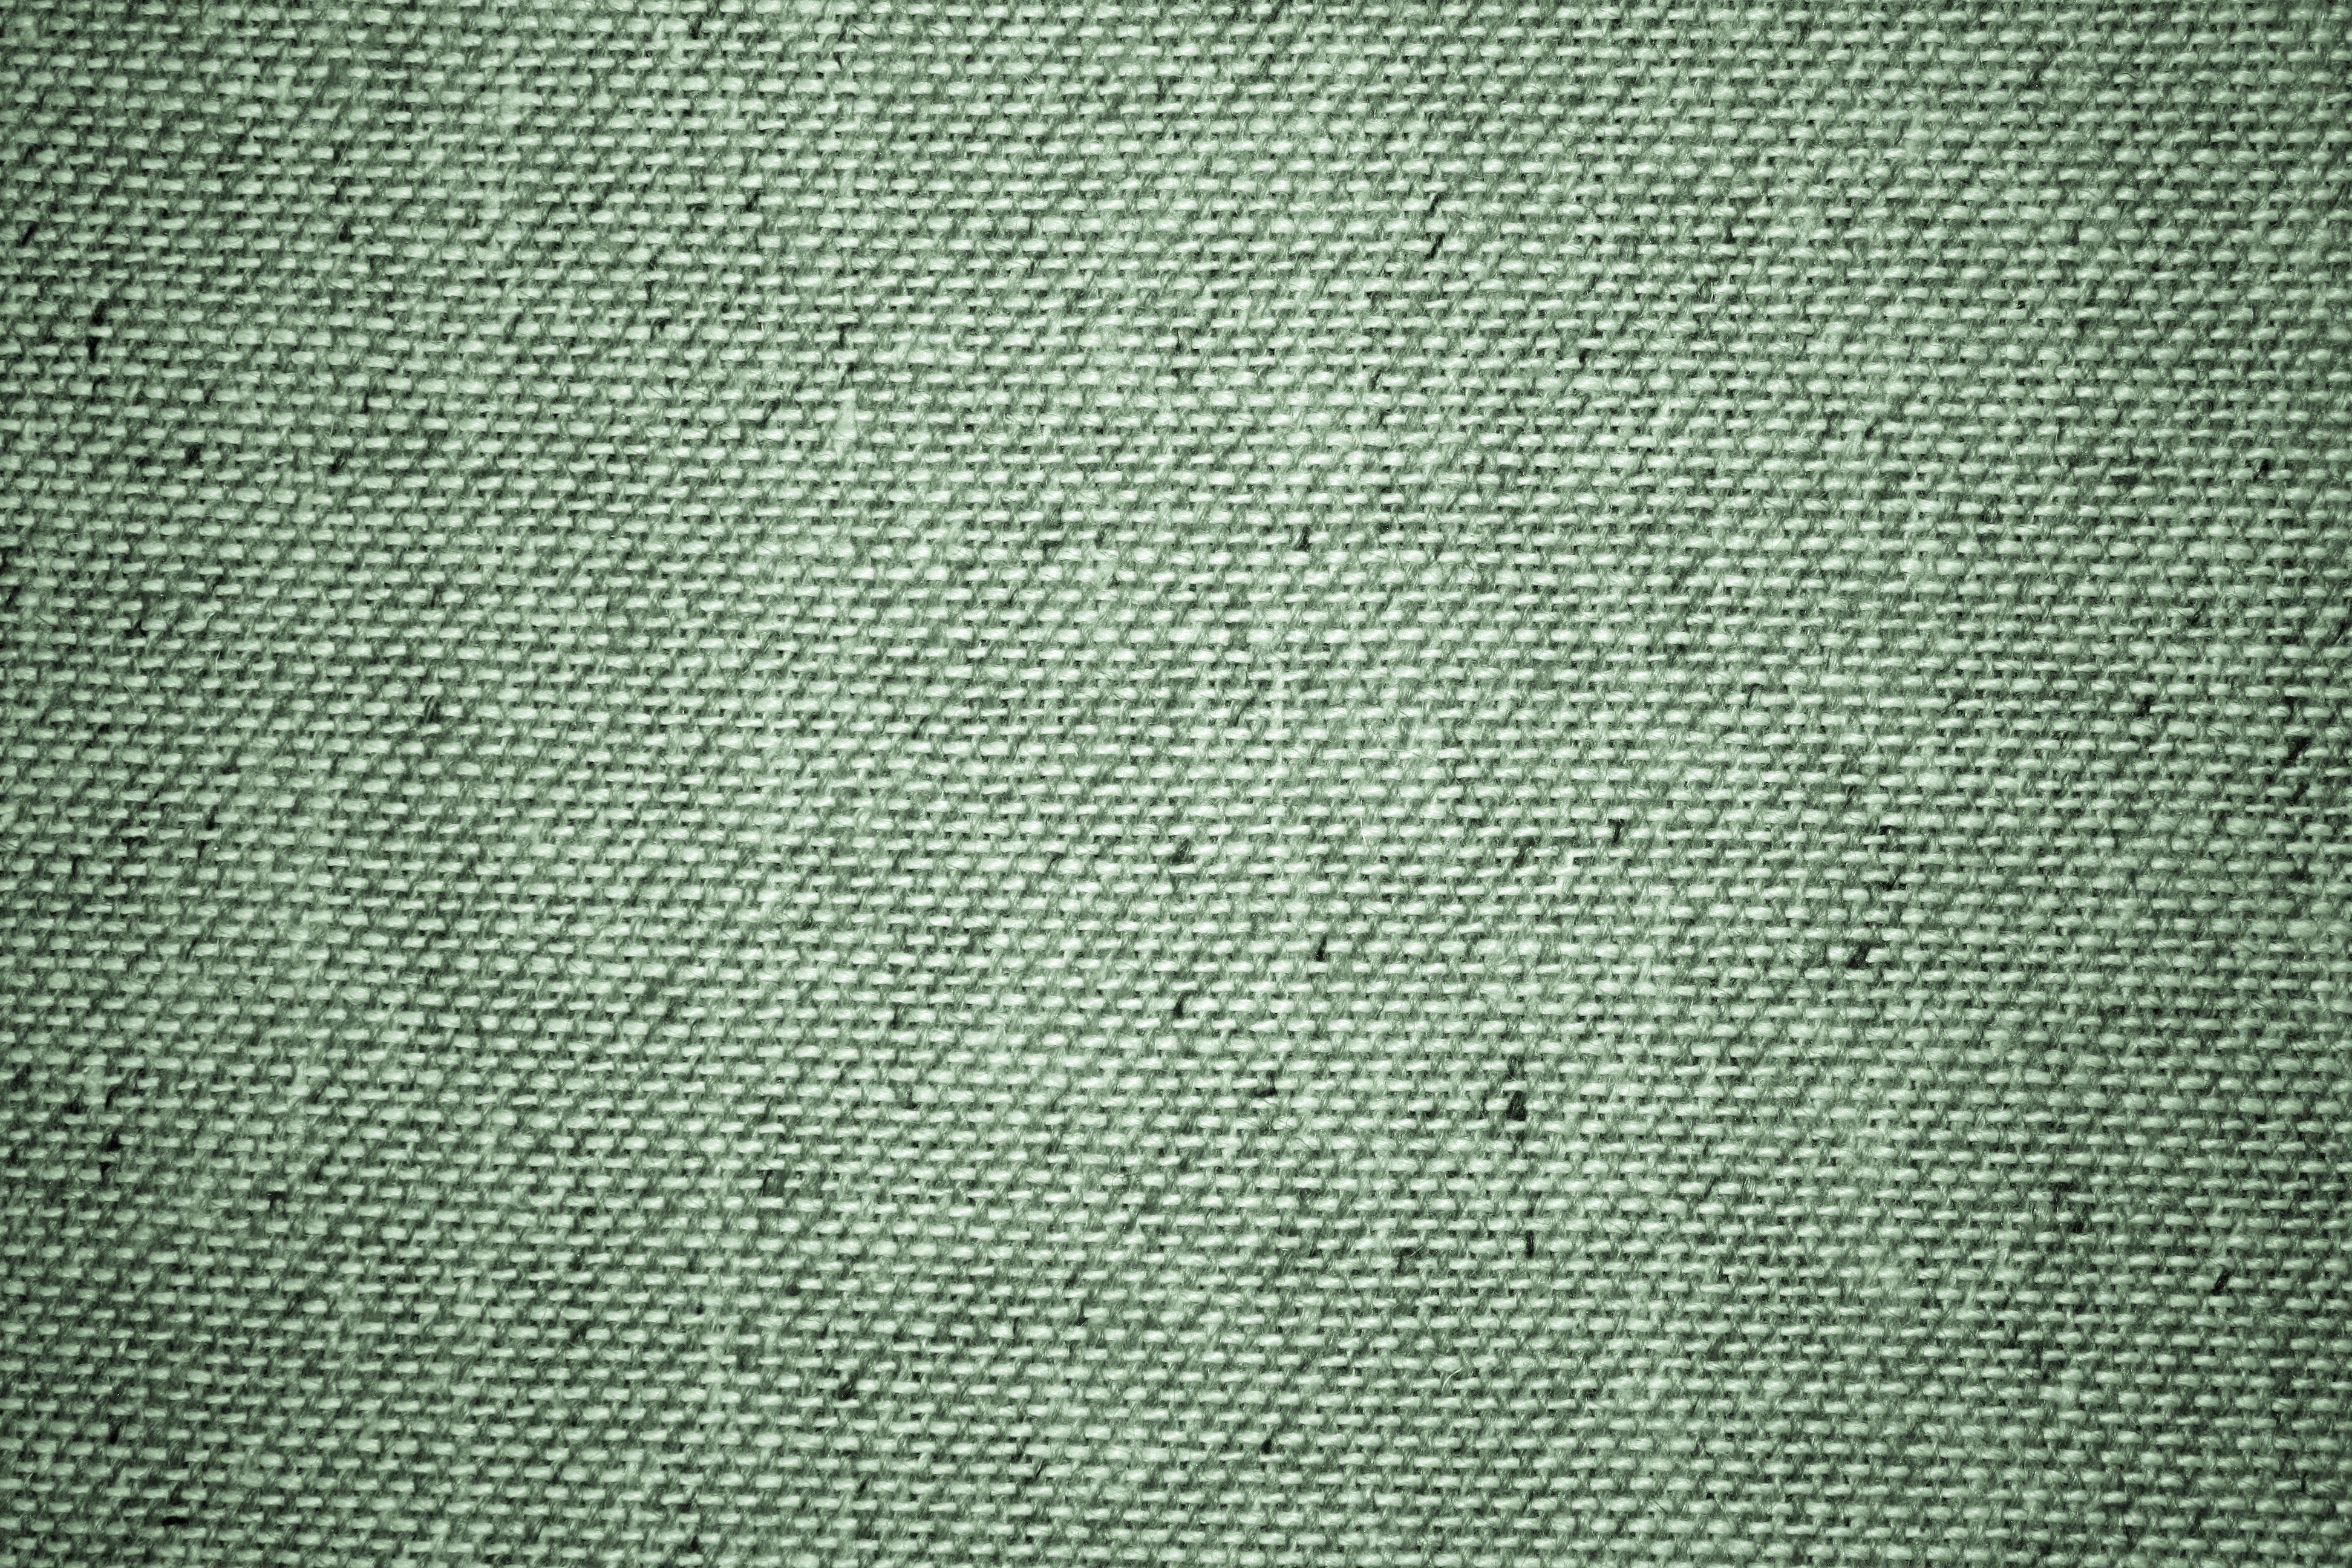 Sage Green Upholstery Fabric Close Up Texture Picture. Free Photograph. Photo Public Domain